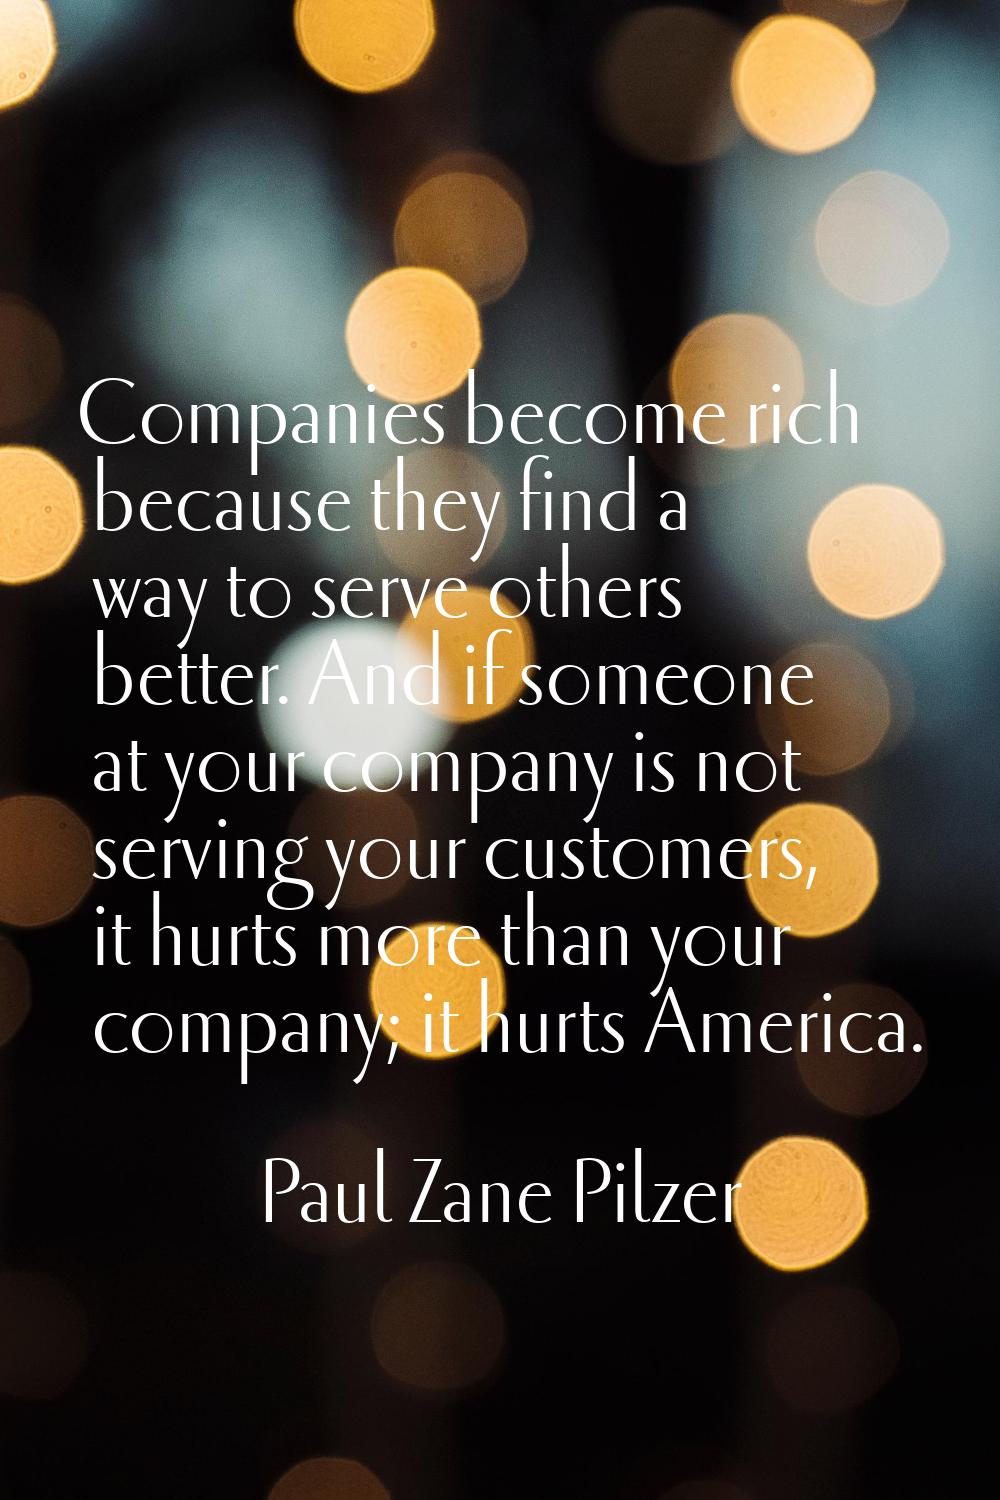 Companies become rich because they find a way to serve others better. And if someone at your compan